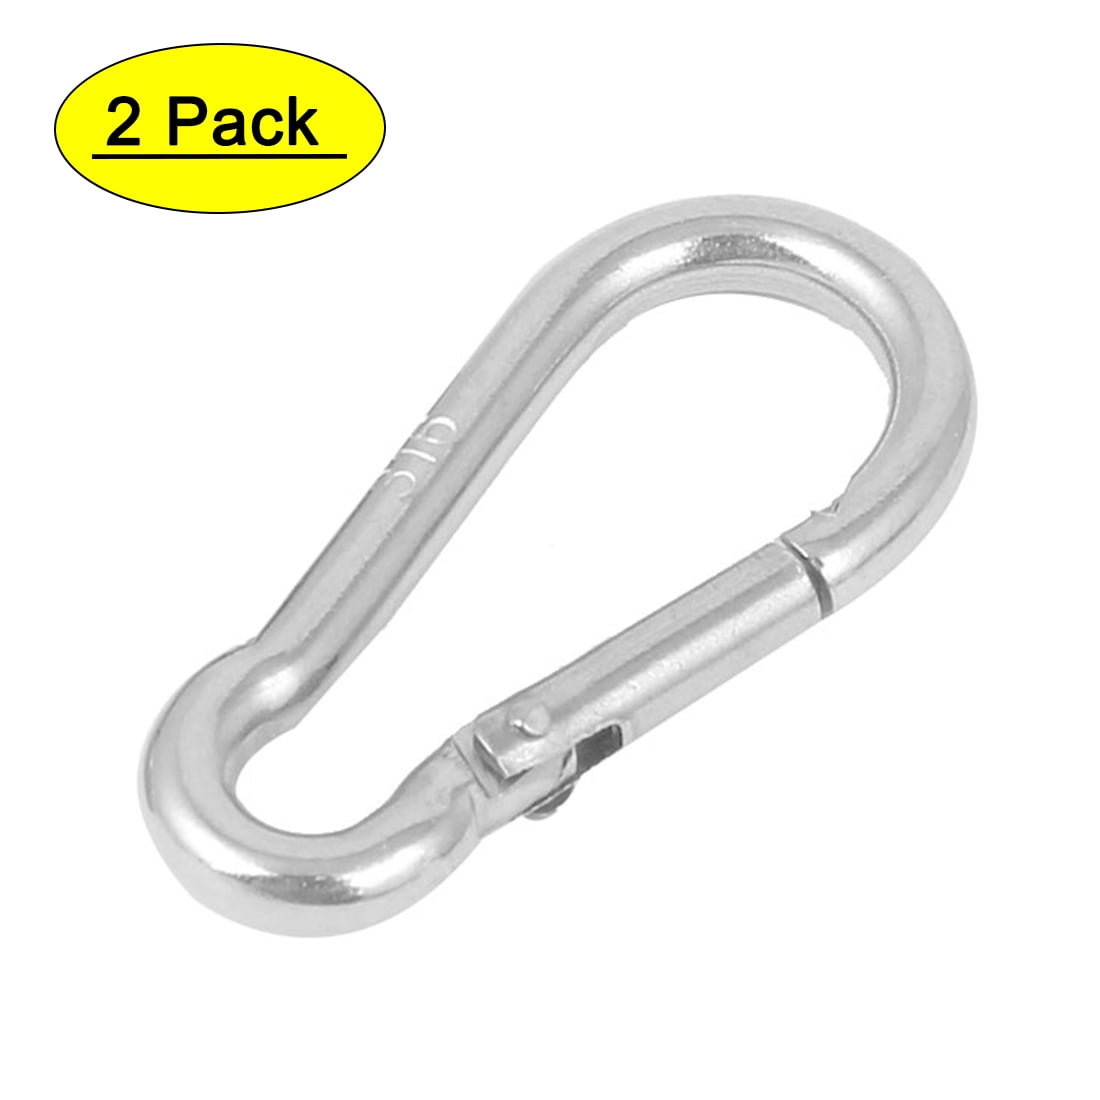 8Pcs Fast Eye Safety Snap Hook Stainless Steel Spring Hook Carabiner with Eyelet 